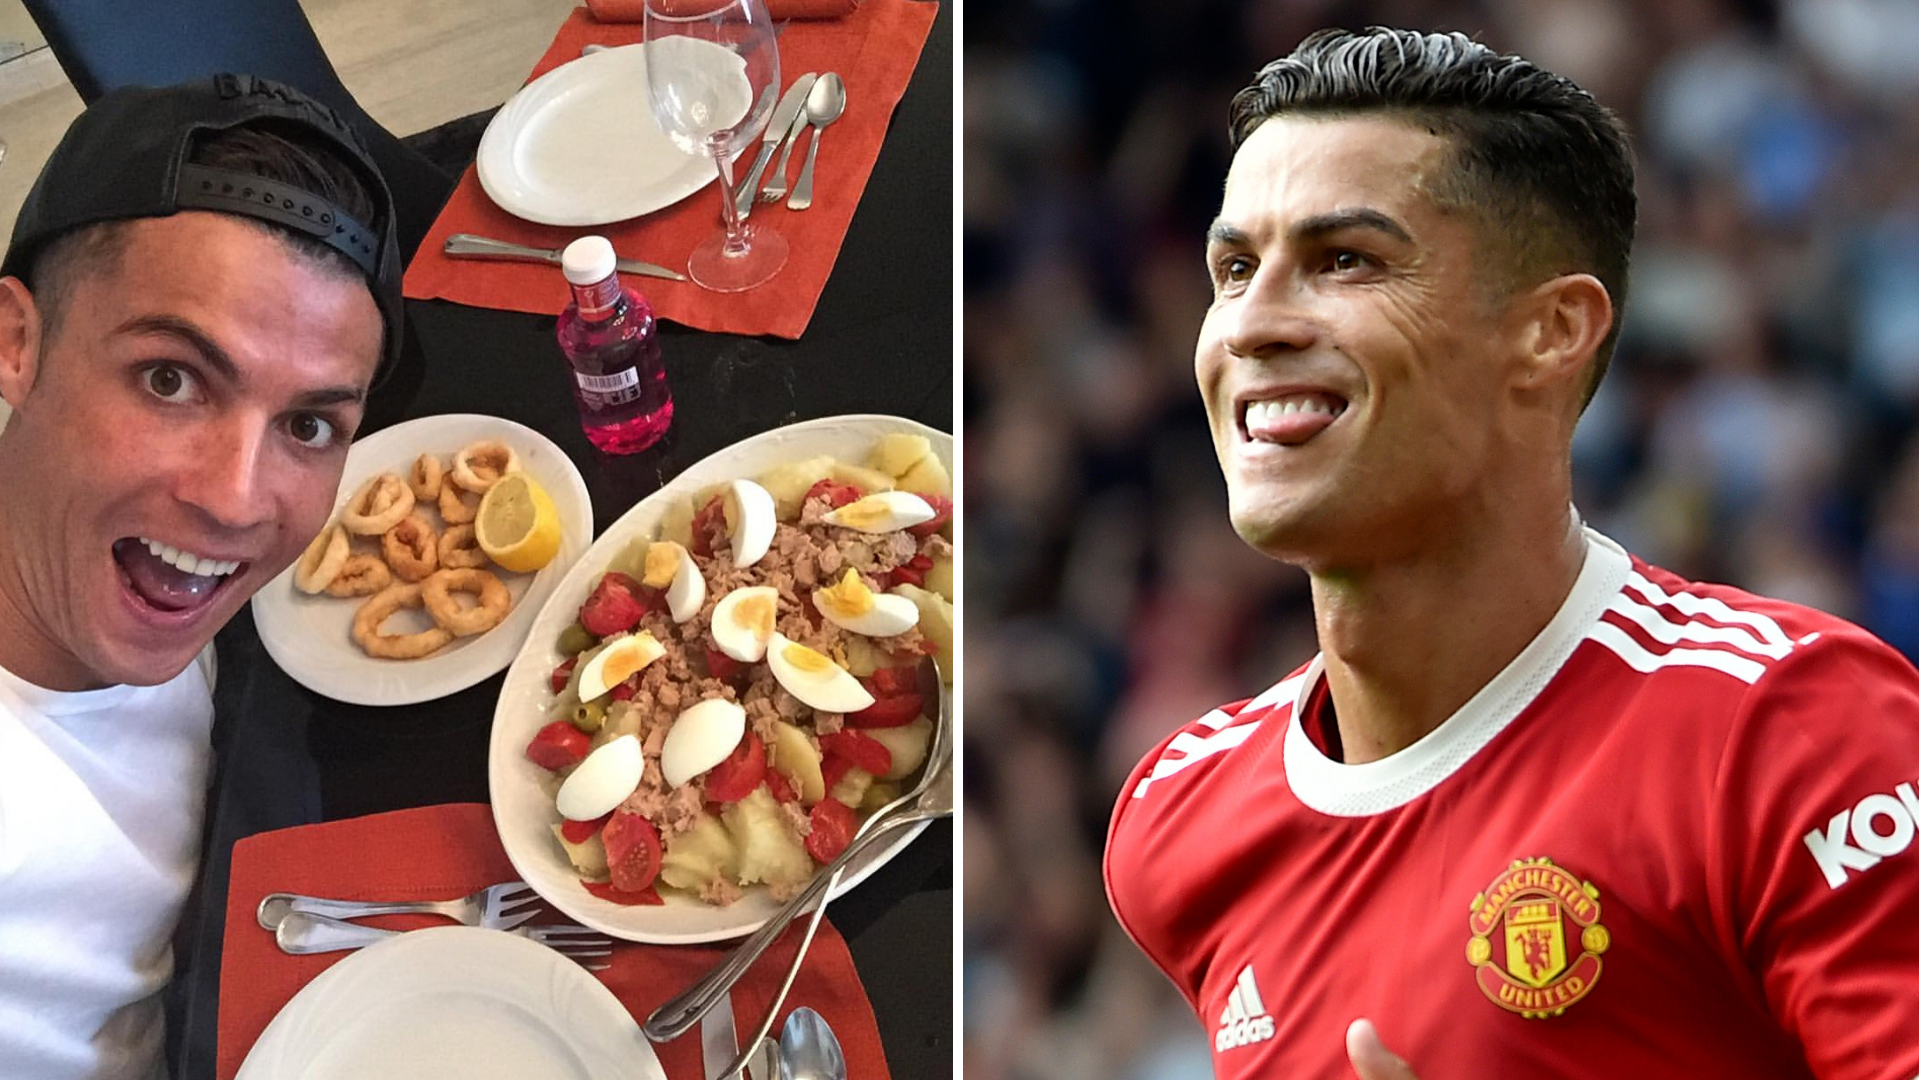 Ronaldo is on a special diet before the start of 2022 World Cup